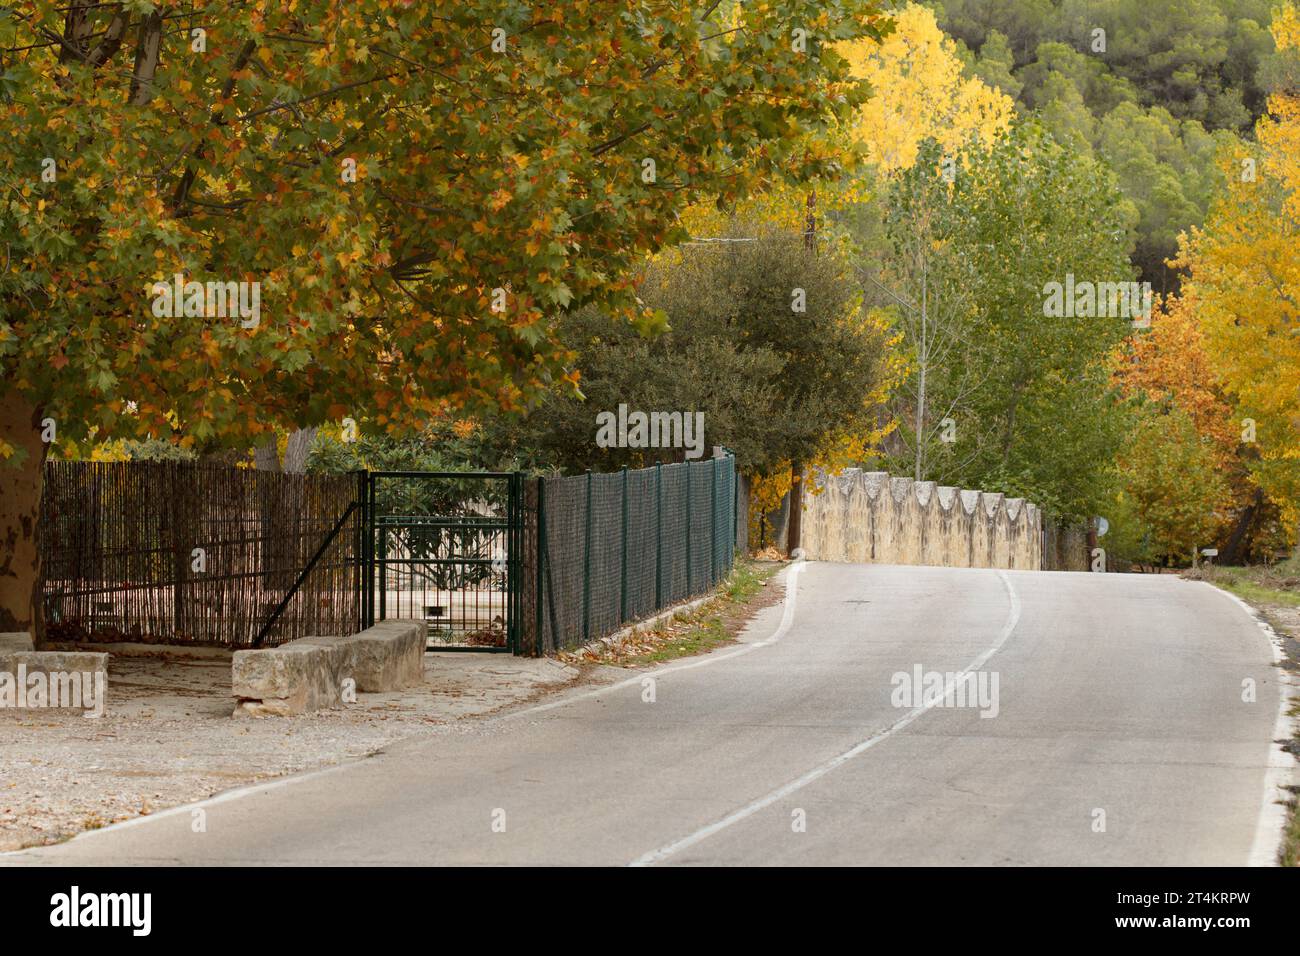 Alcoi preventory road in the Mariola mountain range with trees in autumn decoration, Spain Stock Photo